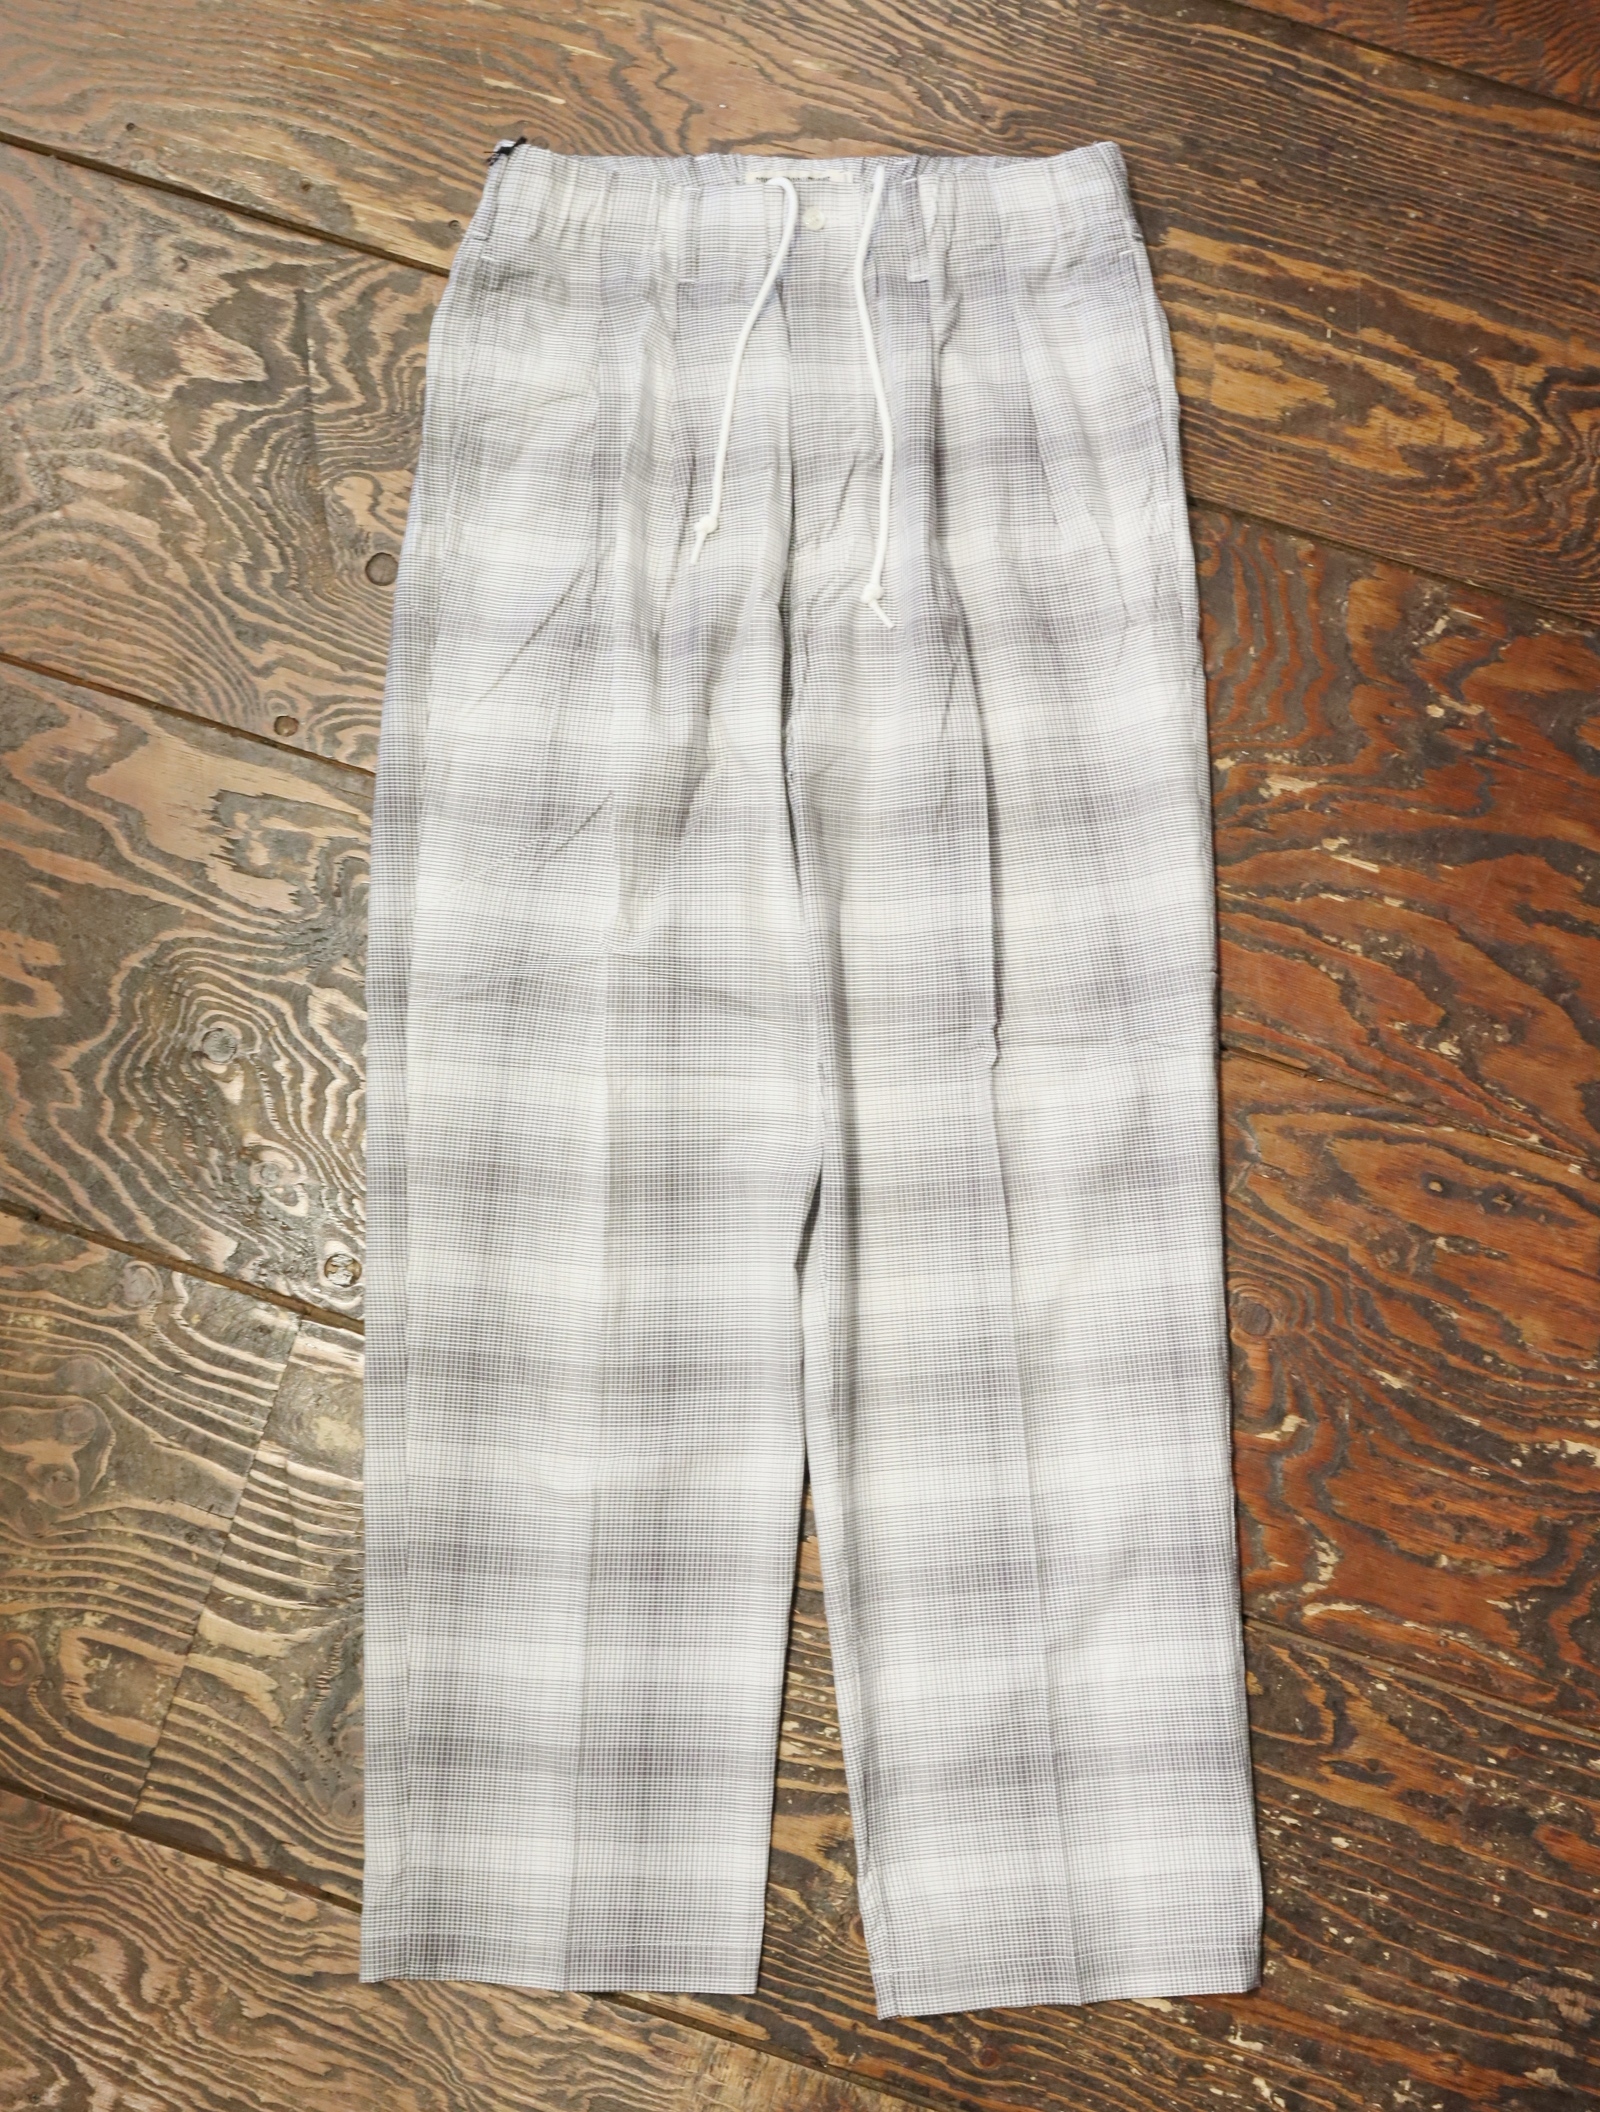 COOTIE 「Ombre Check 2 Tuck Easy Pants 」 オンブレチェックイージー 